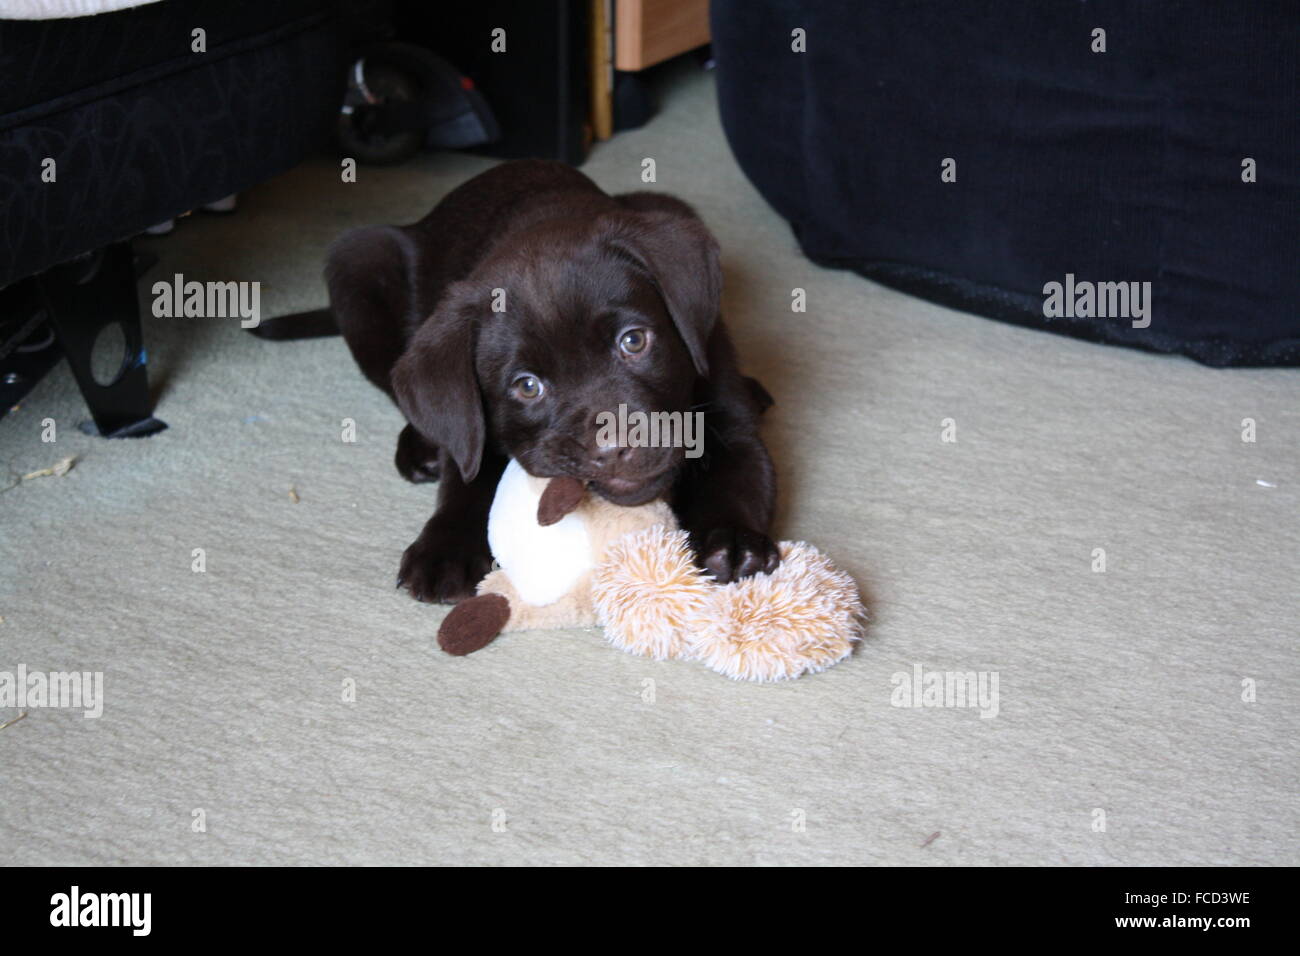 Healthy Canine Dog Playing With A Stuffed Toy Indoor Stock Photo